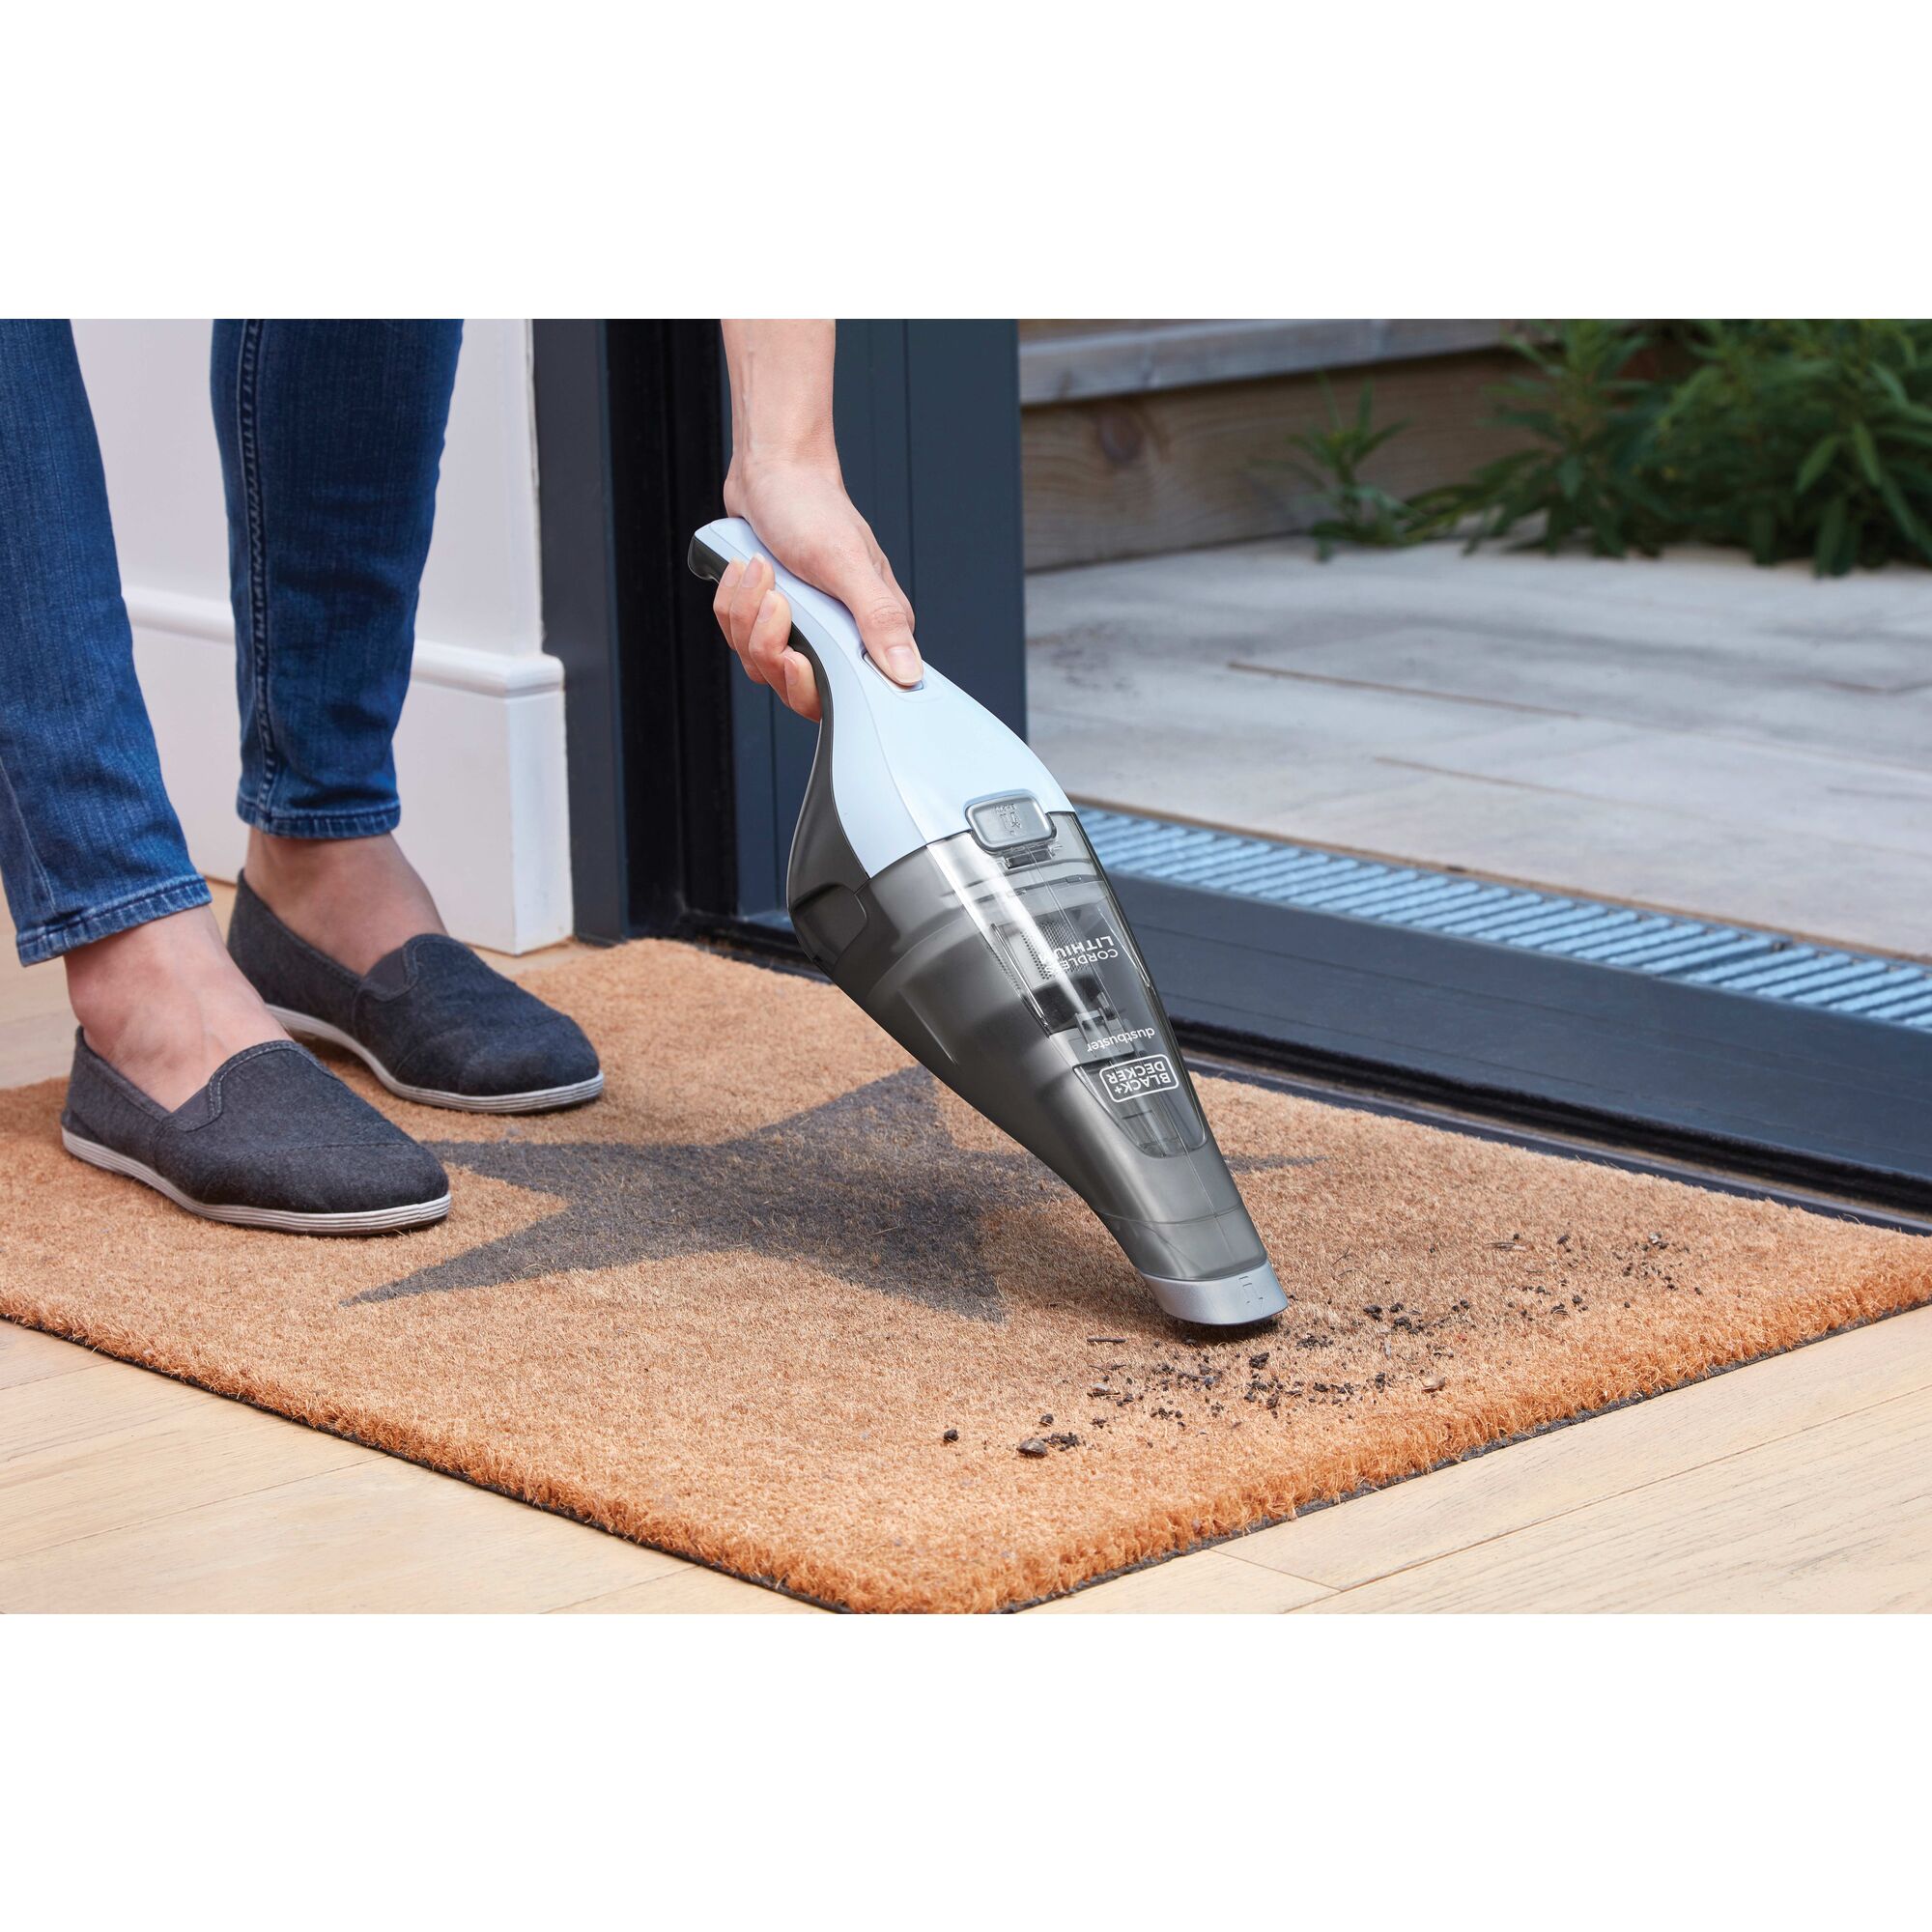 Dustbuster quickclean hand vacuum being used to vacuum dirt from a doormat.